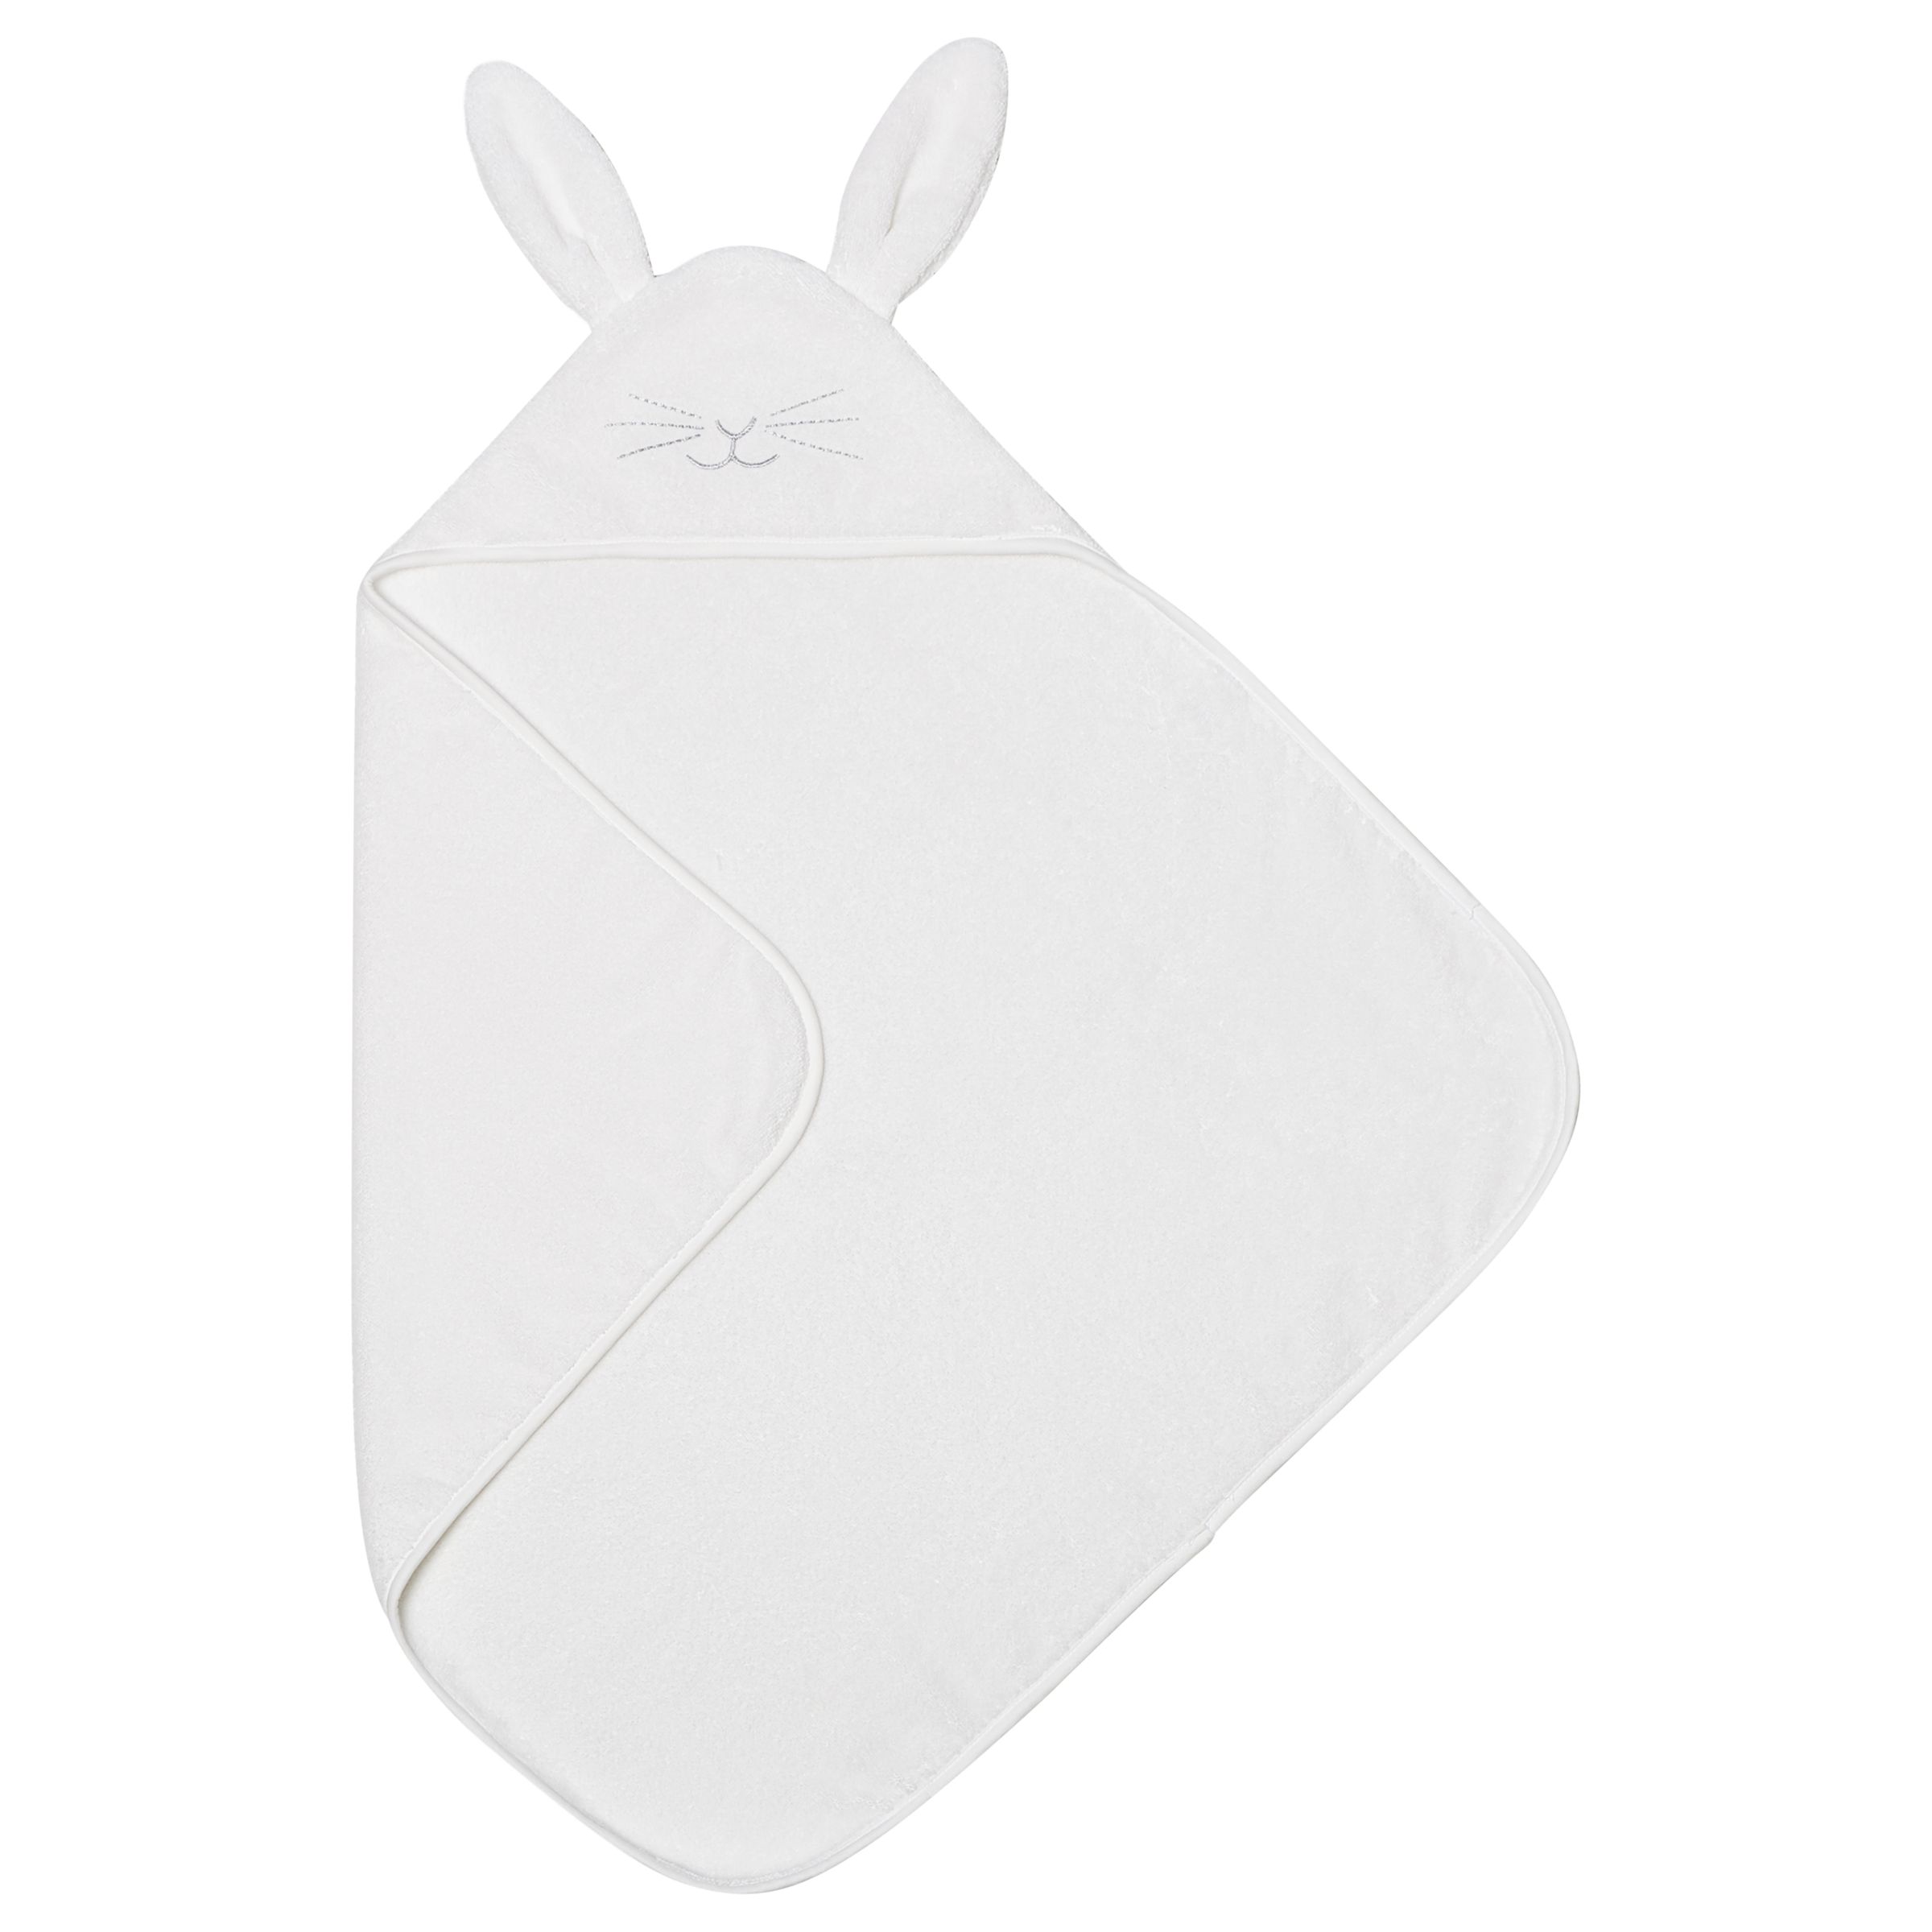 The Little Green Sheep Organic Cotton Bunny Hooded Towel